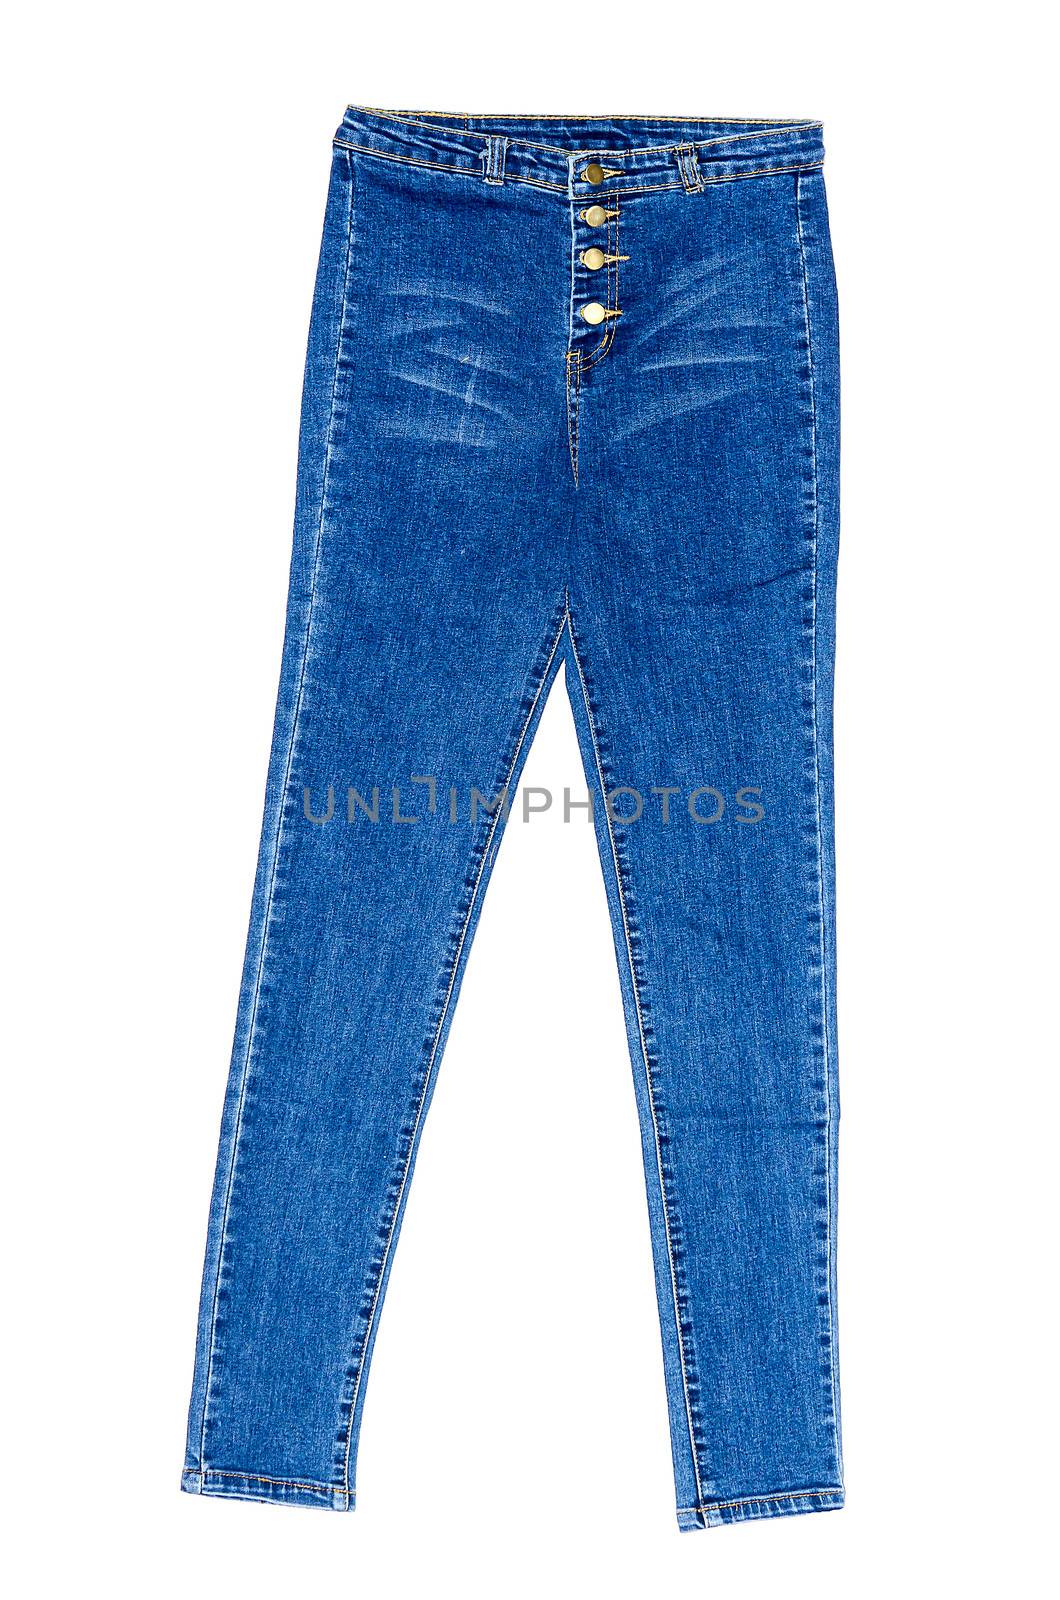 The jeans isolated on white background. Clothes